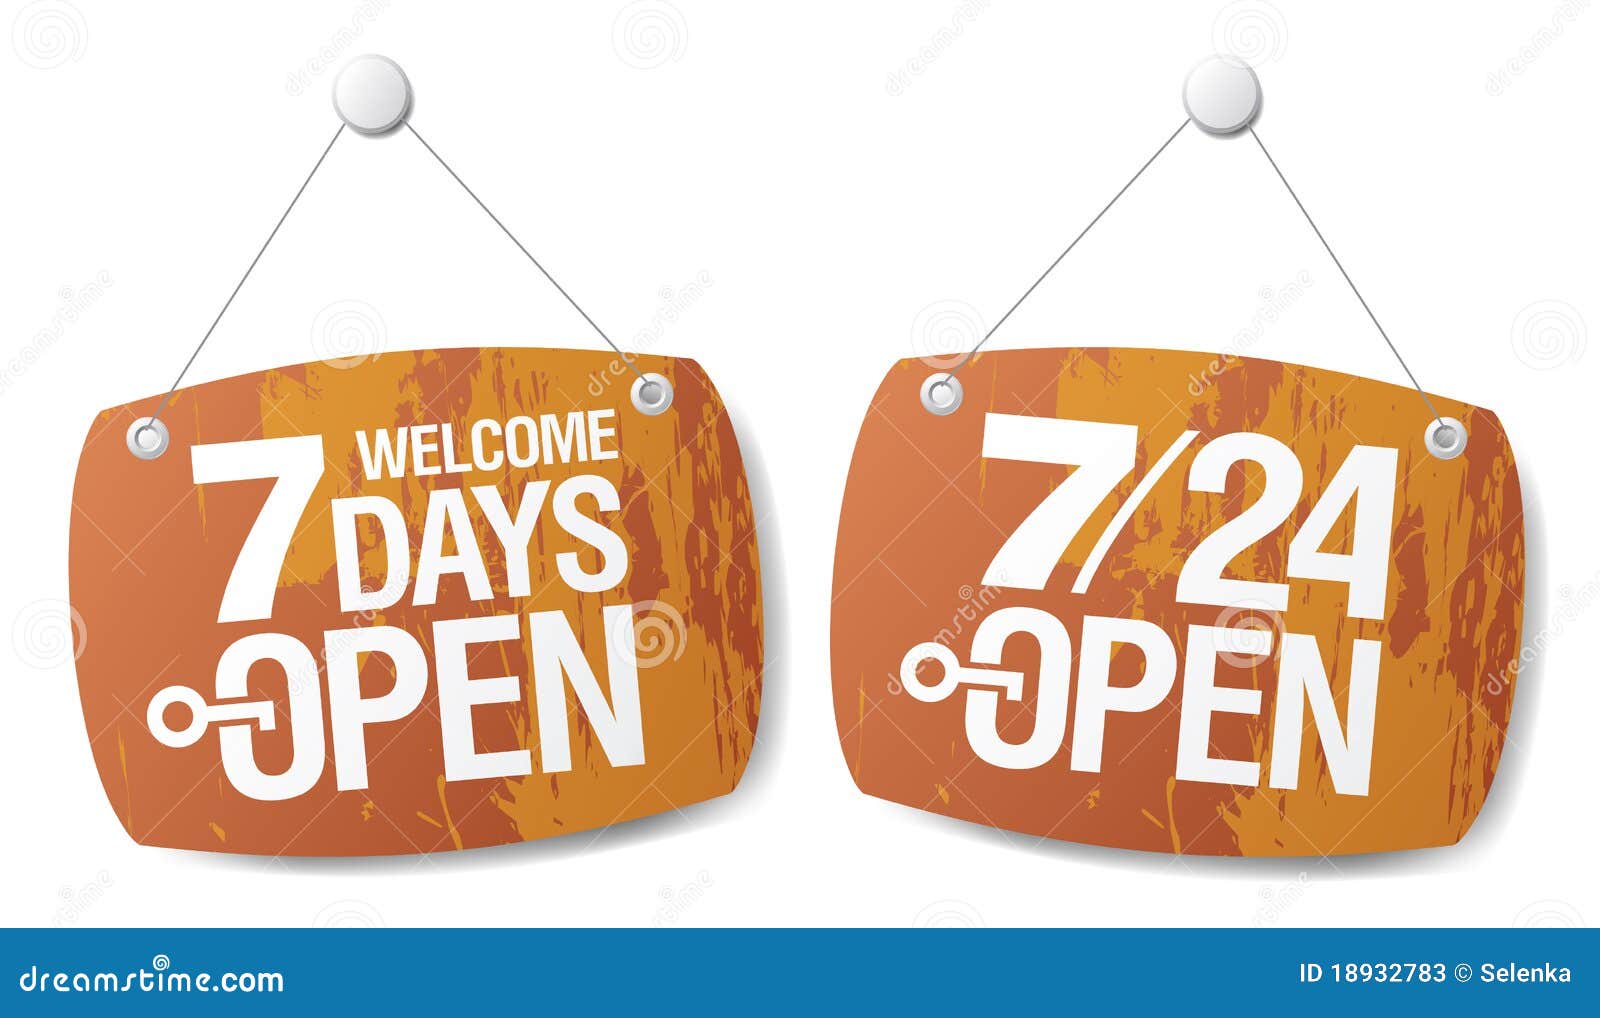 7 days open signs